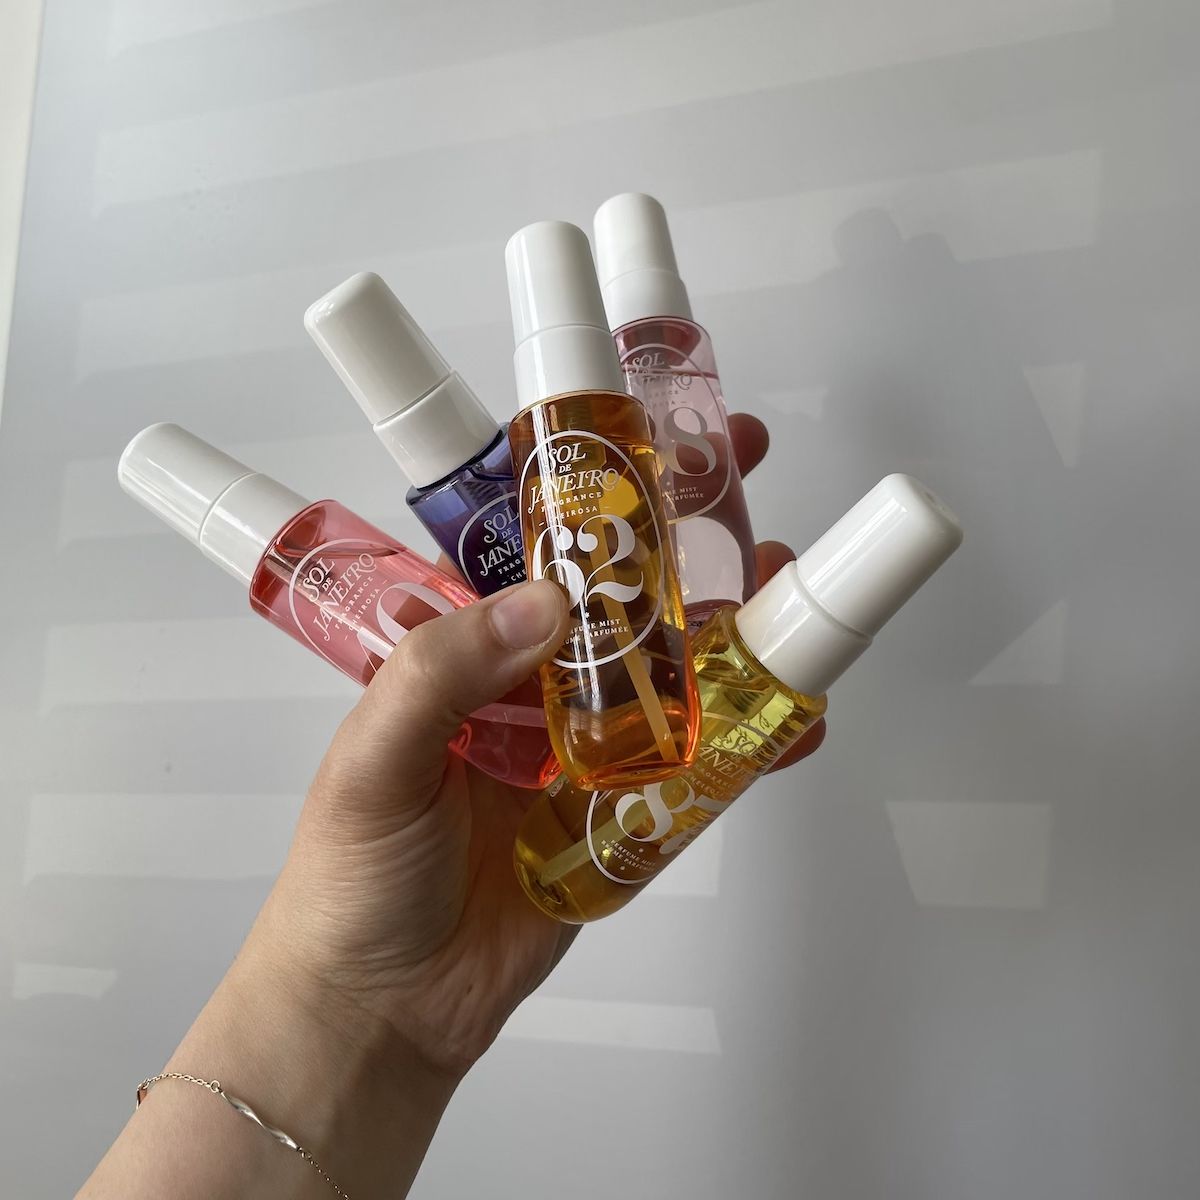 A Beauty Editor’s Review of the Sol de Janeiro Perfume Mist Discovery Set